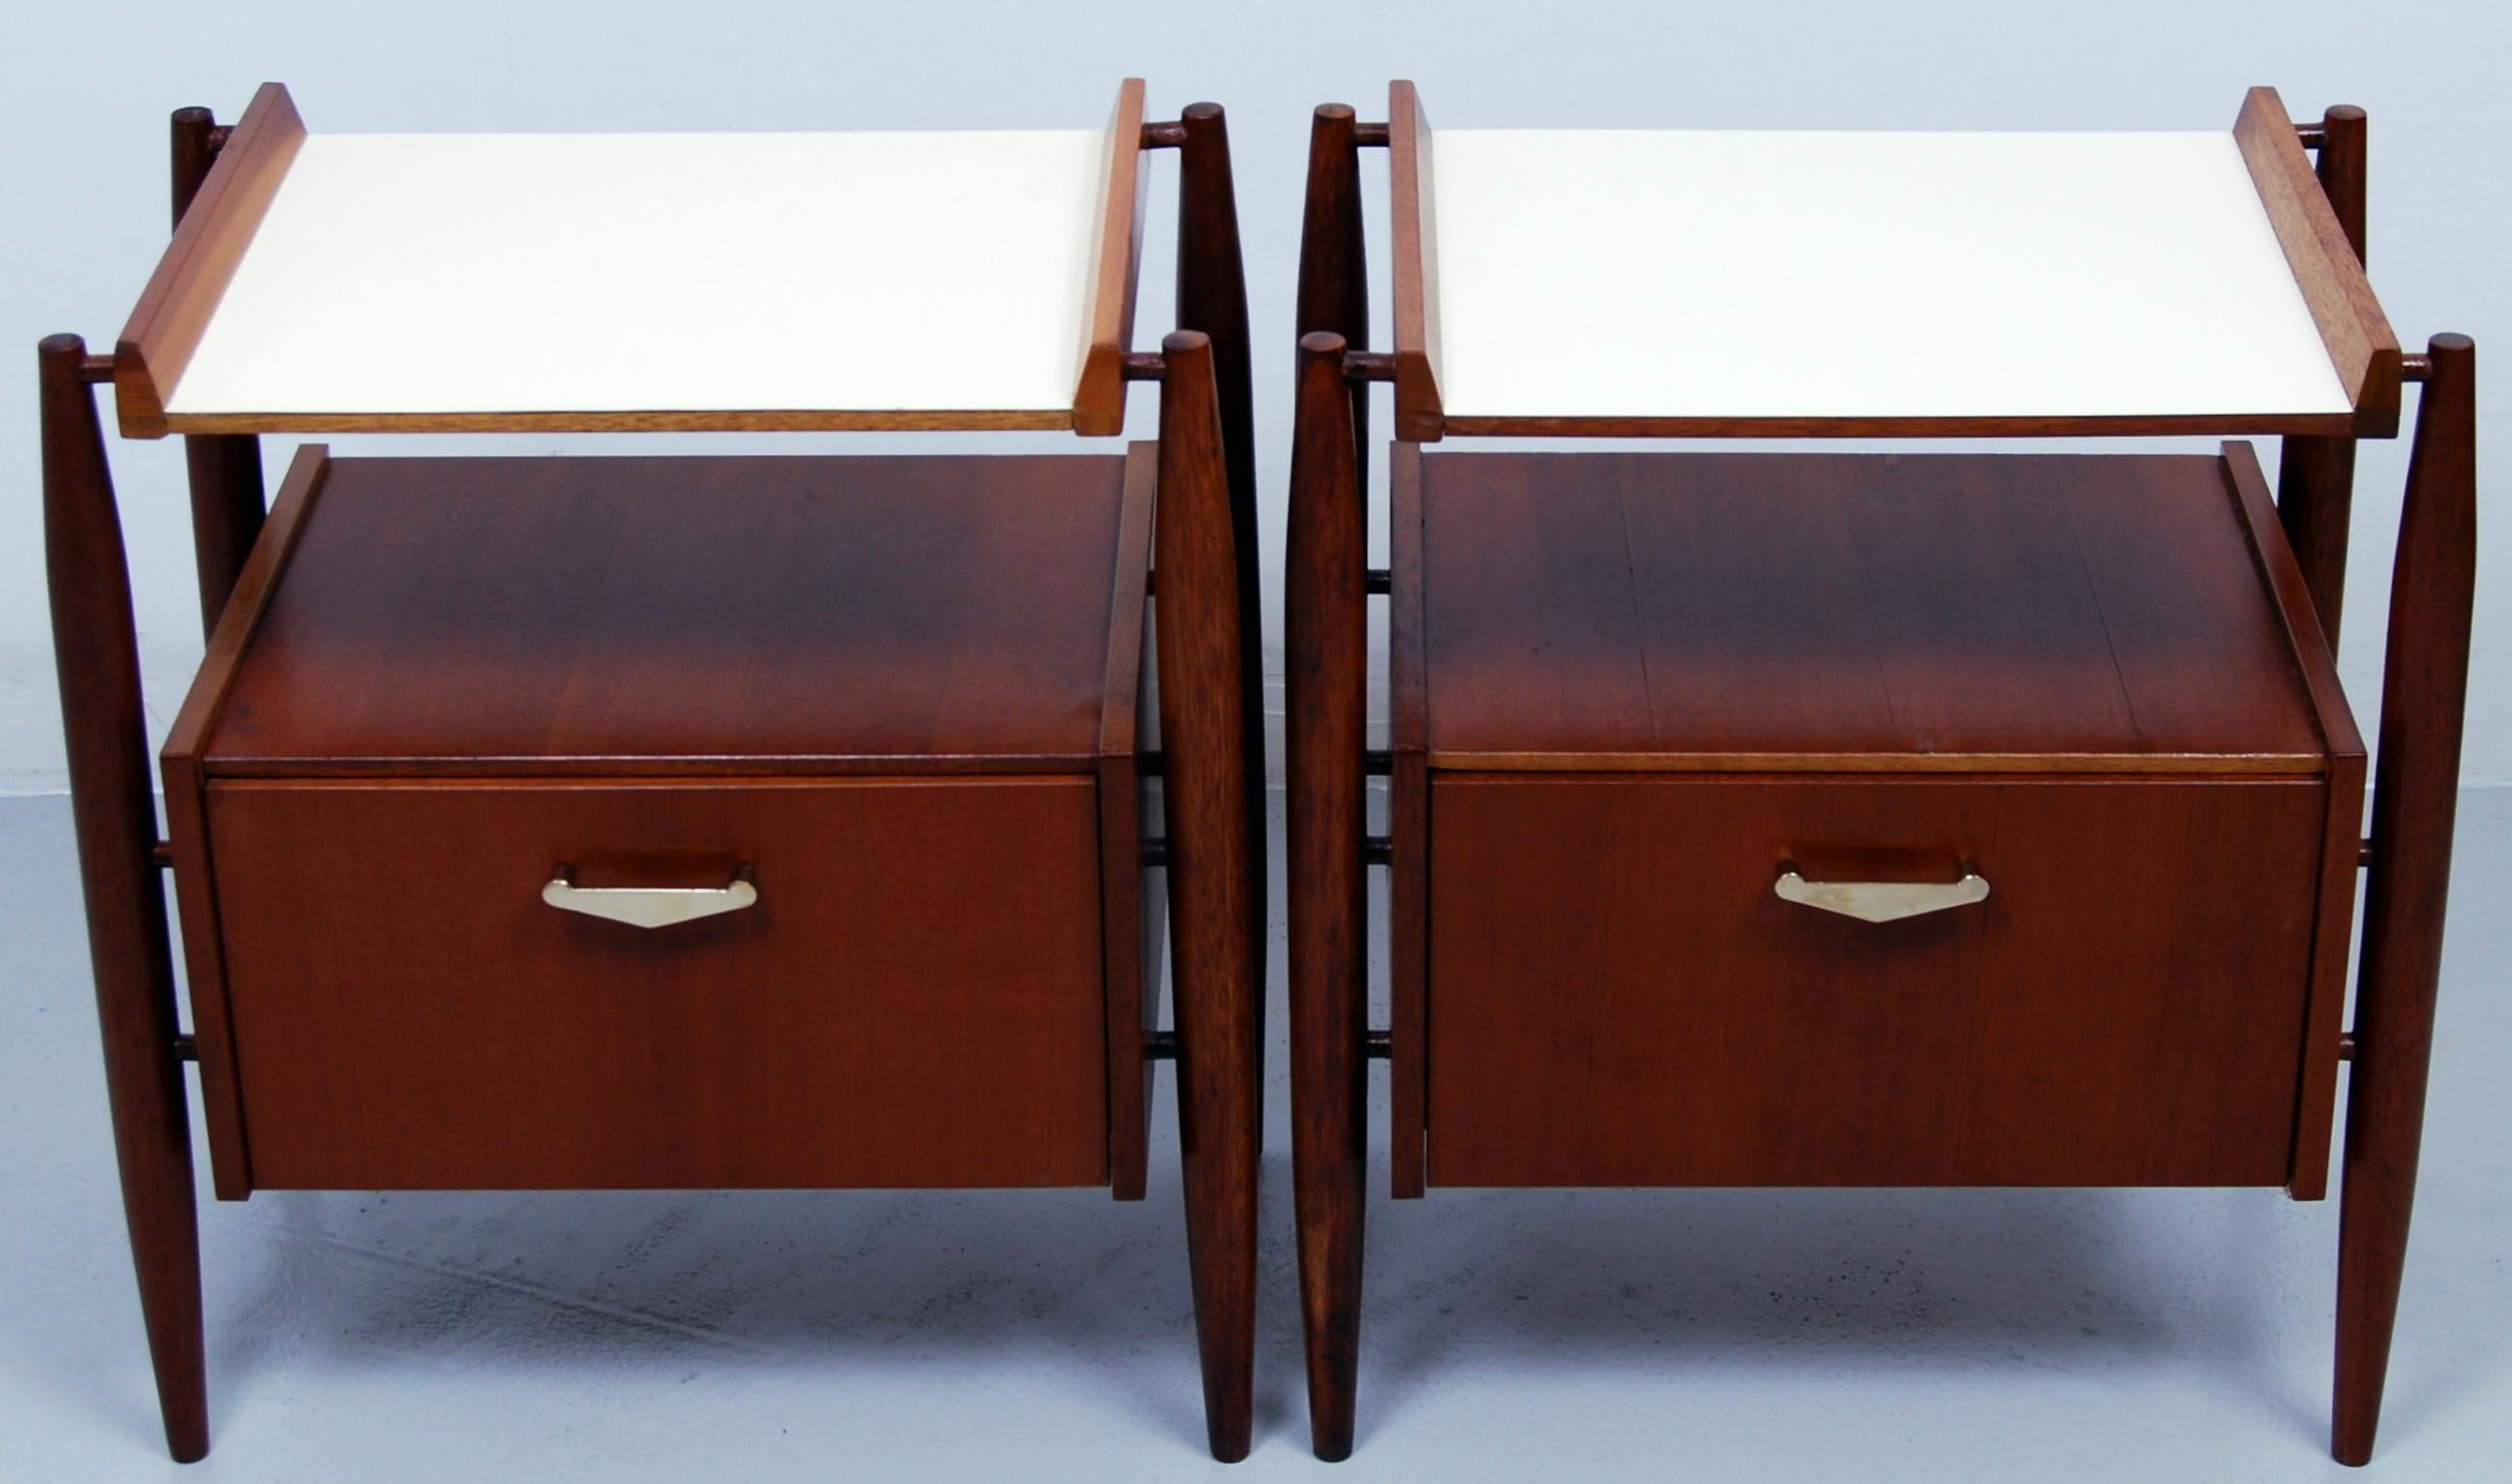 Stylish Italian pair of teak and formica midcentury bedside tables with slim tapered legs on offsets and with brass pulls. Manufactured by Dal Vera Mobili.
 